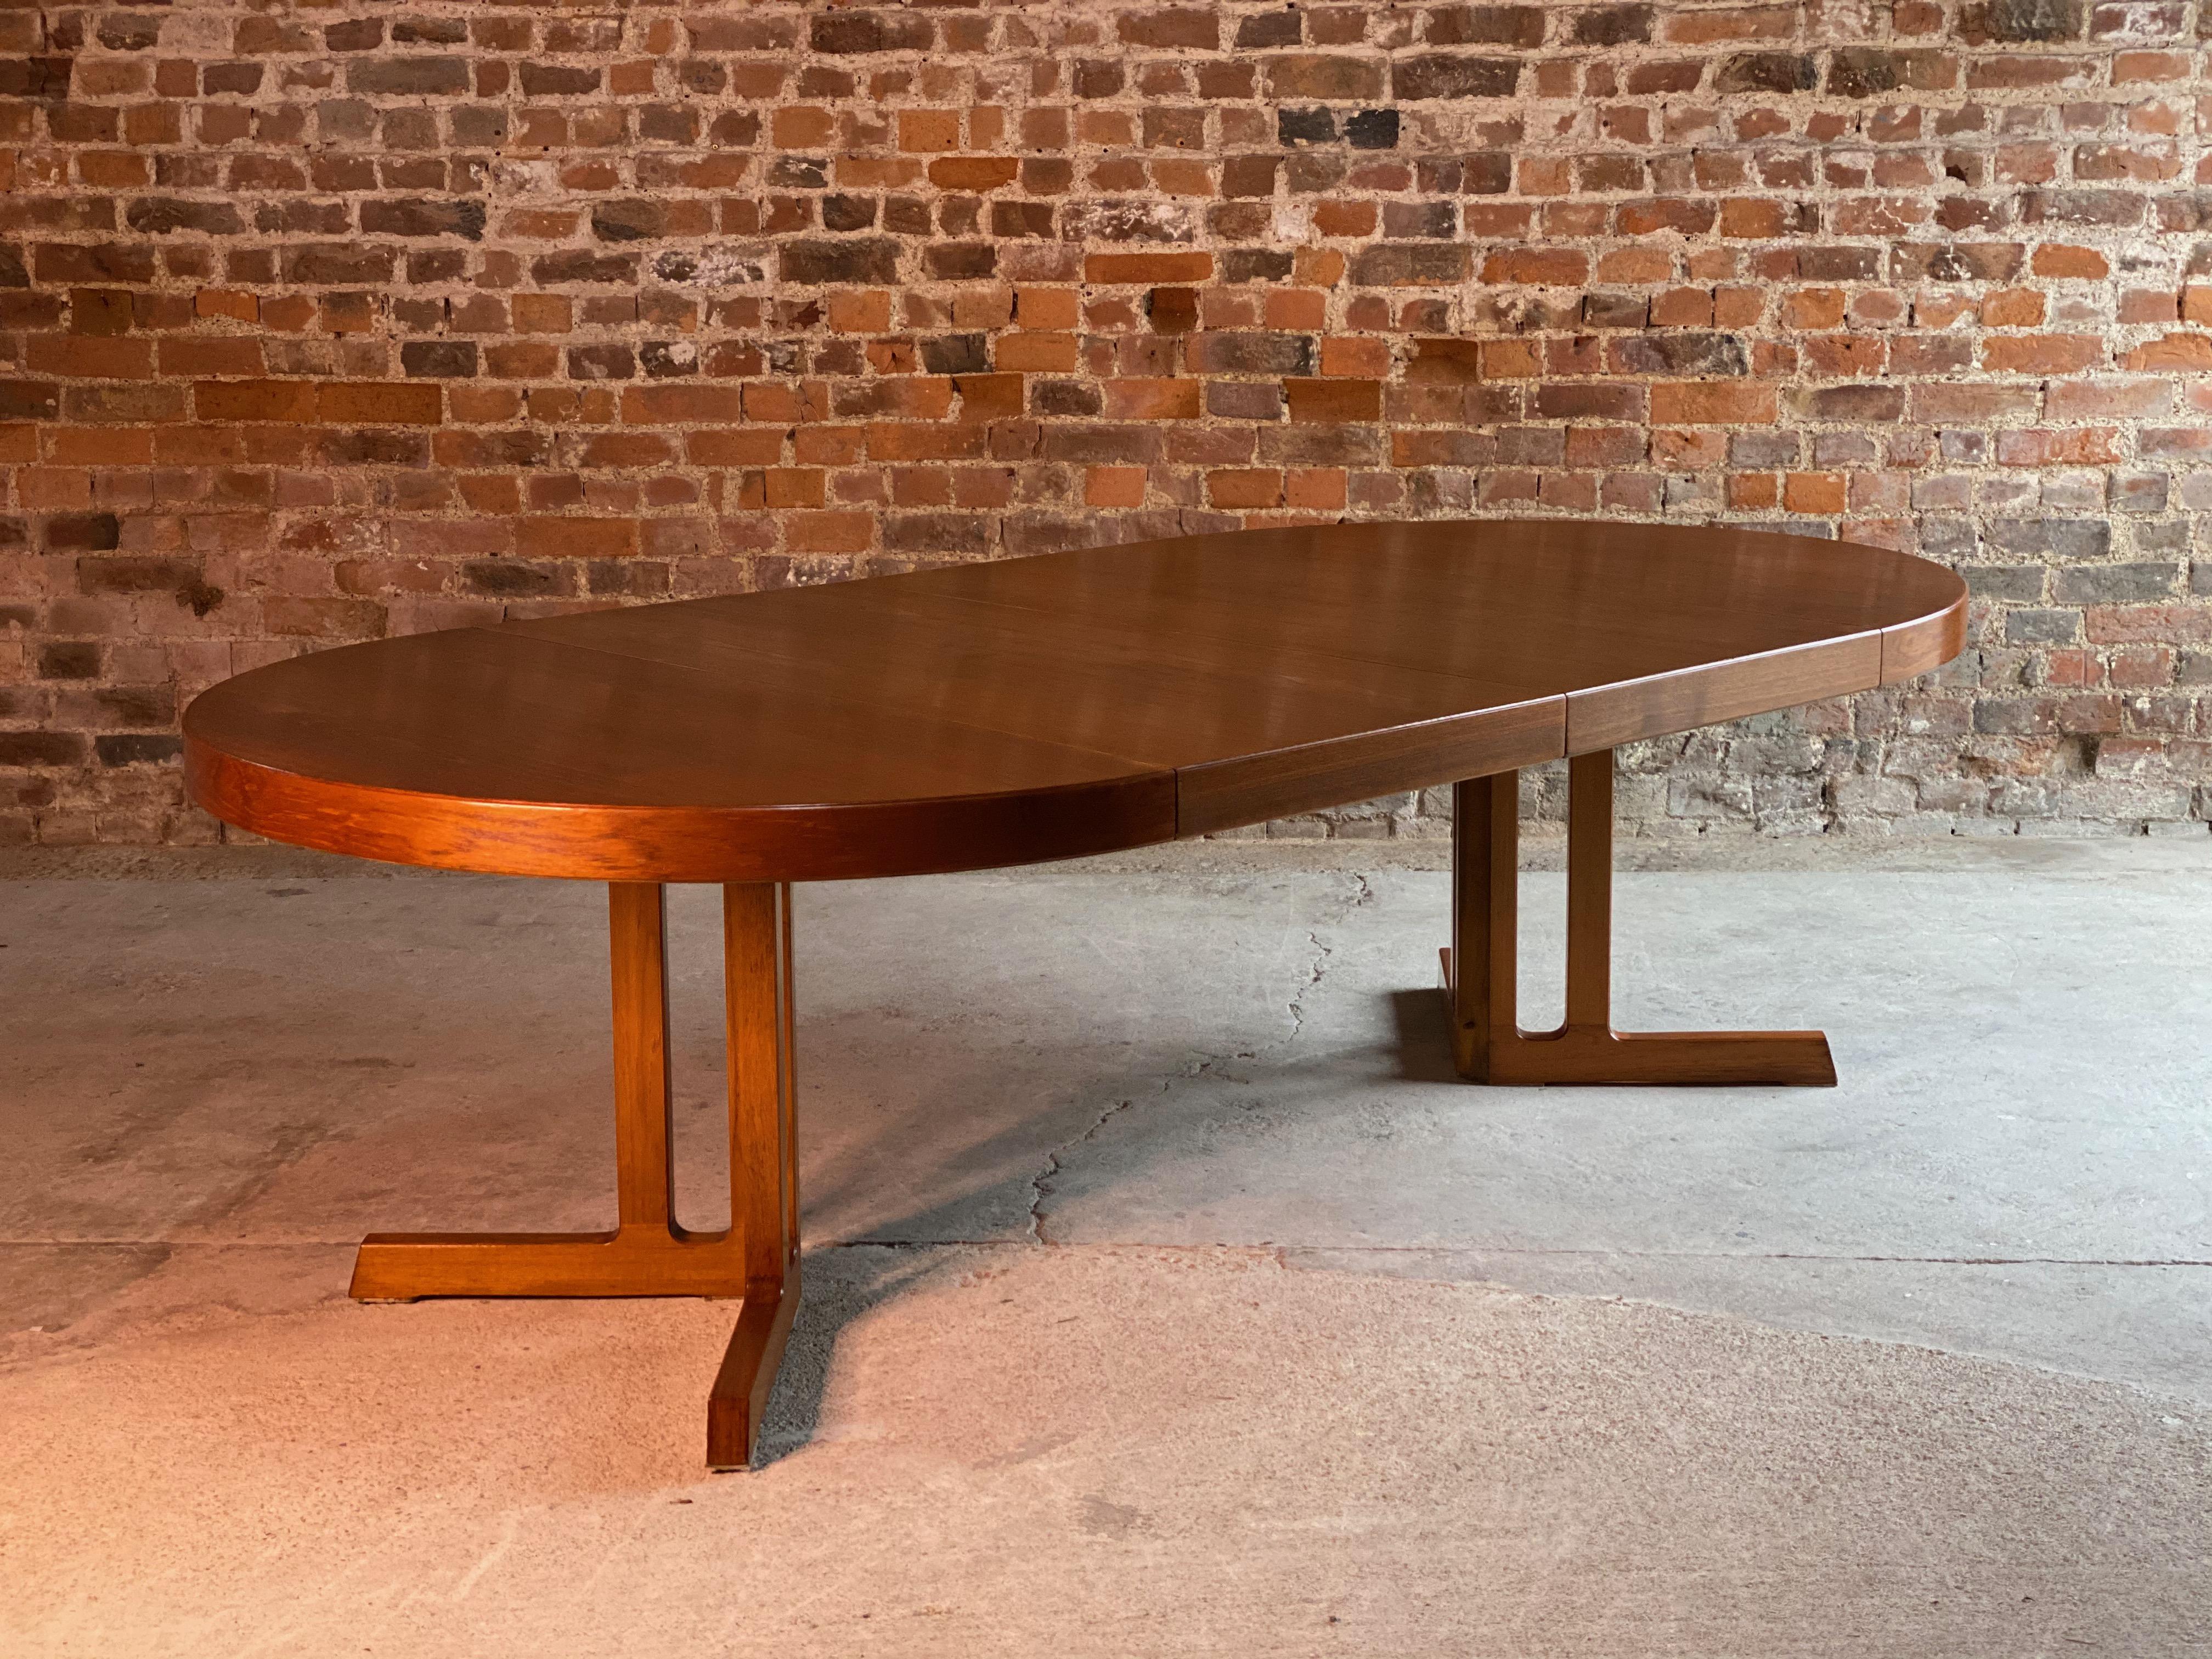 Midcentury Danish dining table by Niels Otto Møller Model 15

We are delighted to offer this fabulous midcentury Danish design model 75 dining table by Niels Otto Møller manufactured by J.L Mollers circa 1950s, the best Møller circular extending